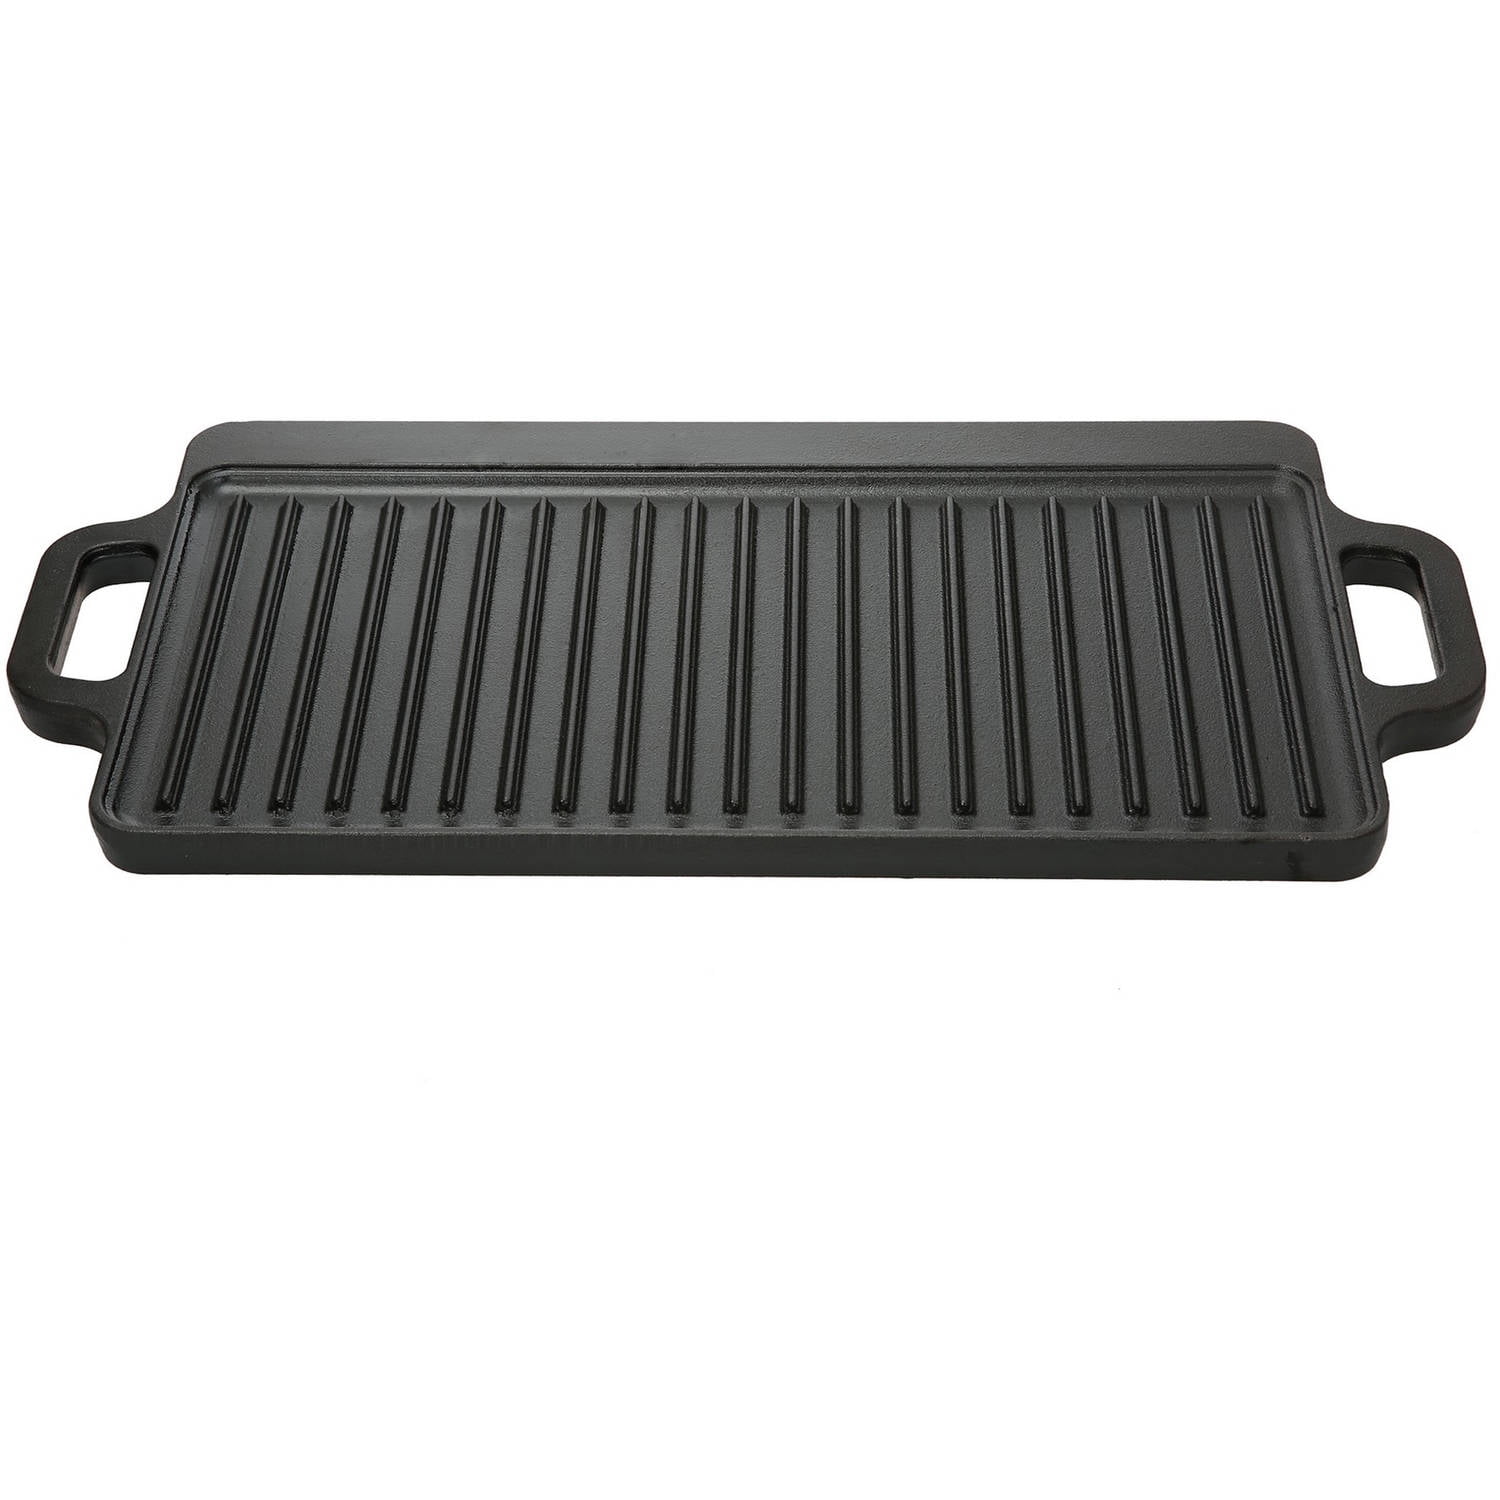 Reversible Cast Iron Griddle/Grill, 20″ x 9-1/2″